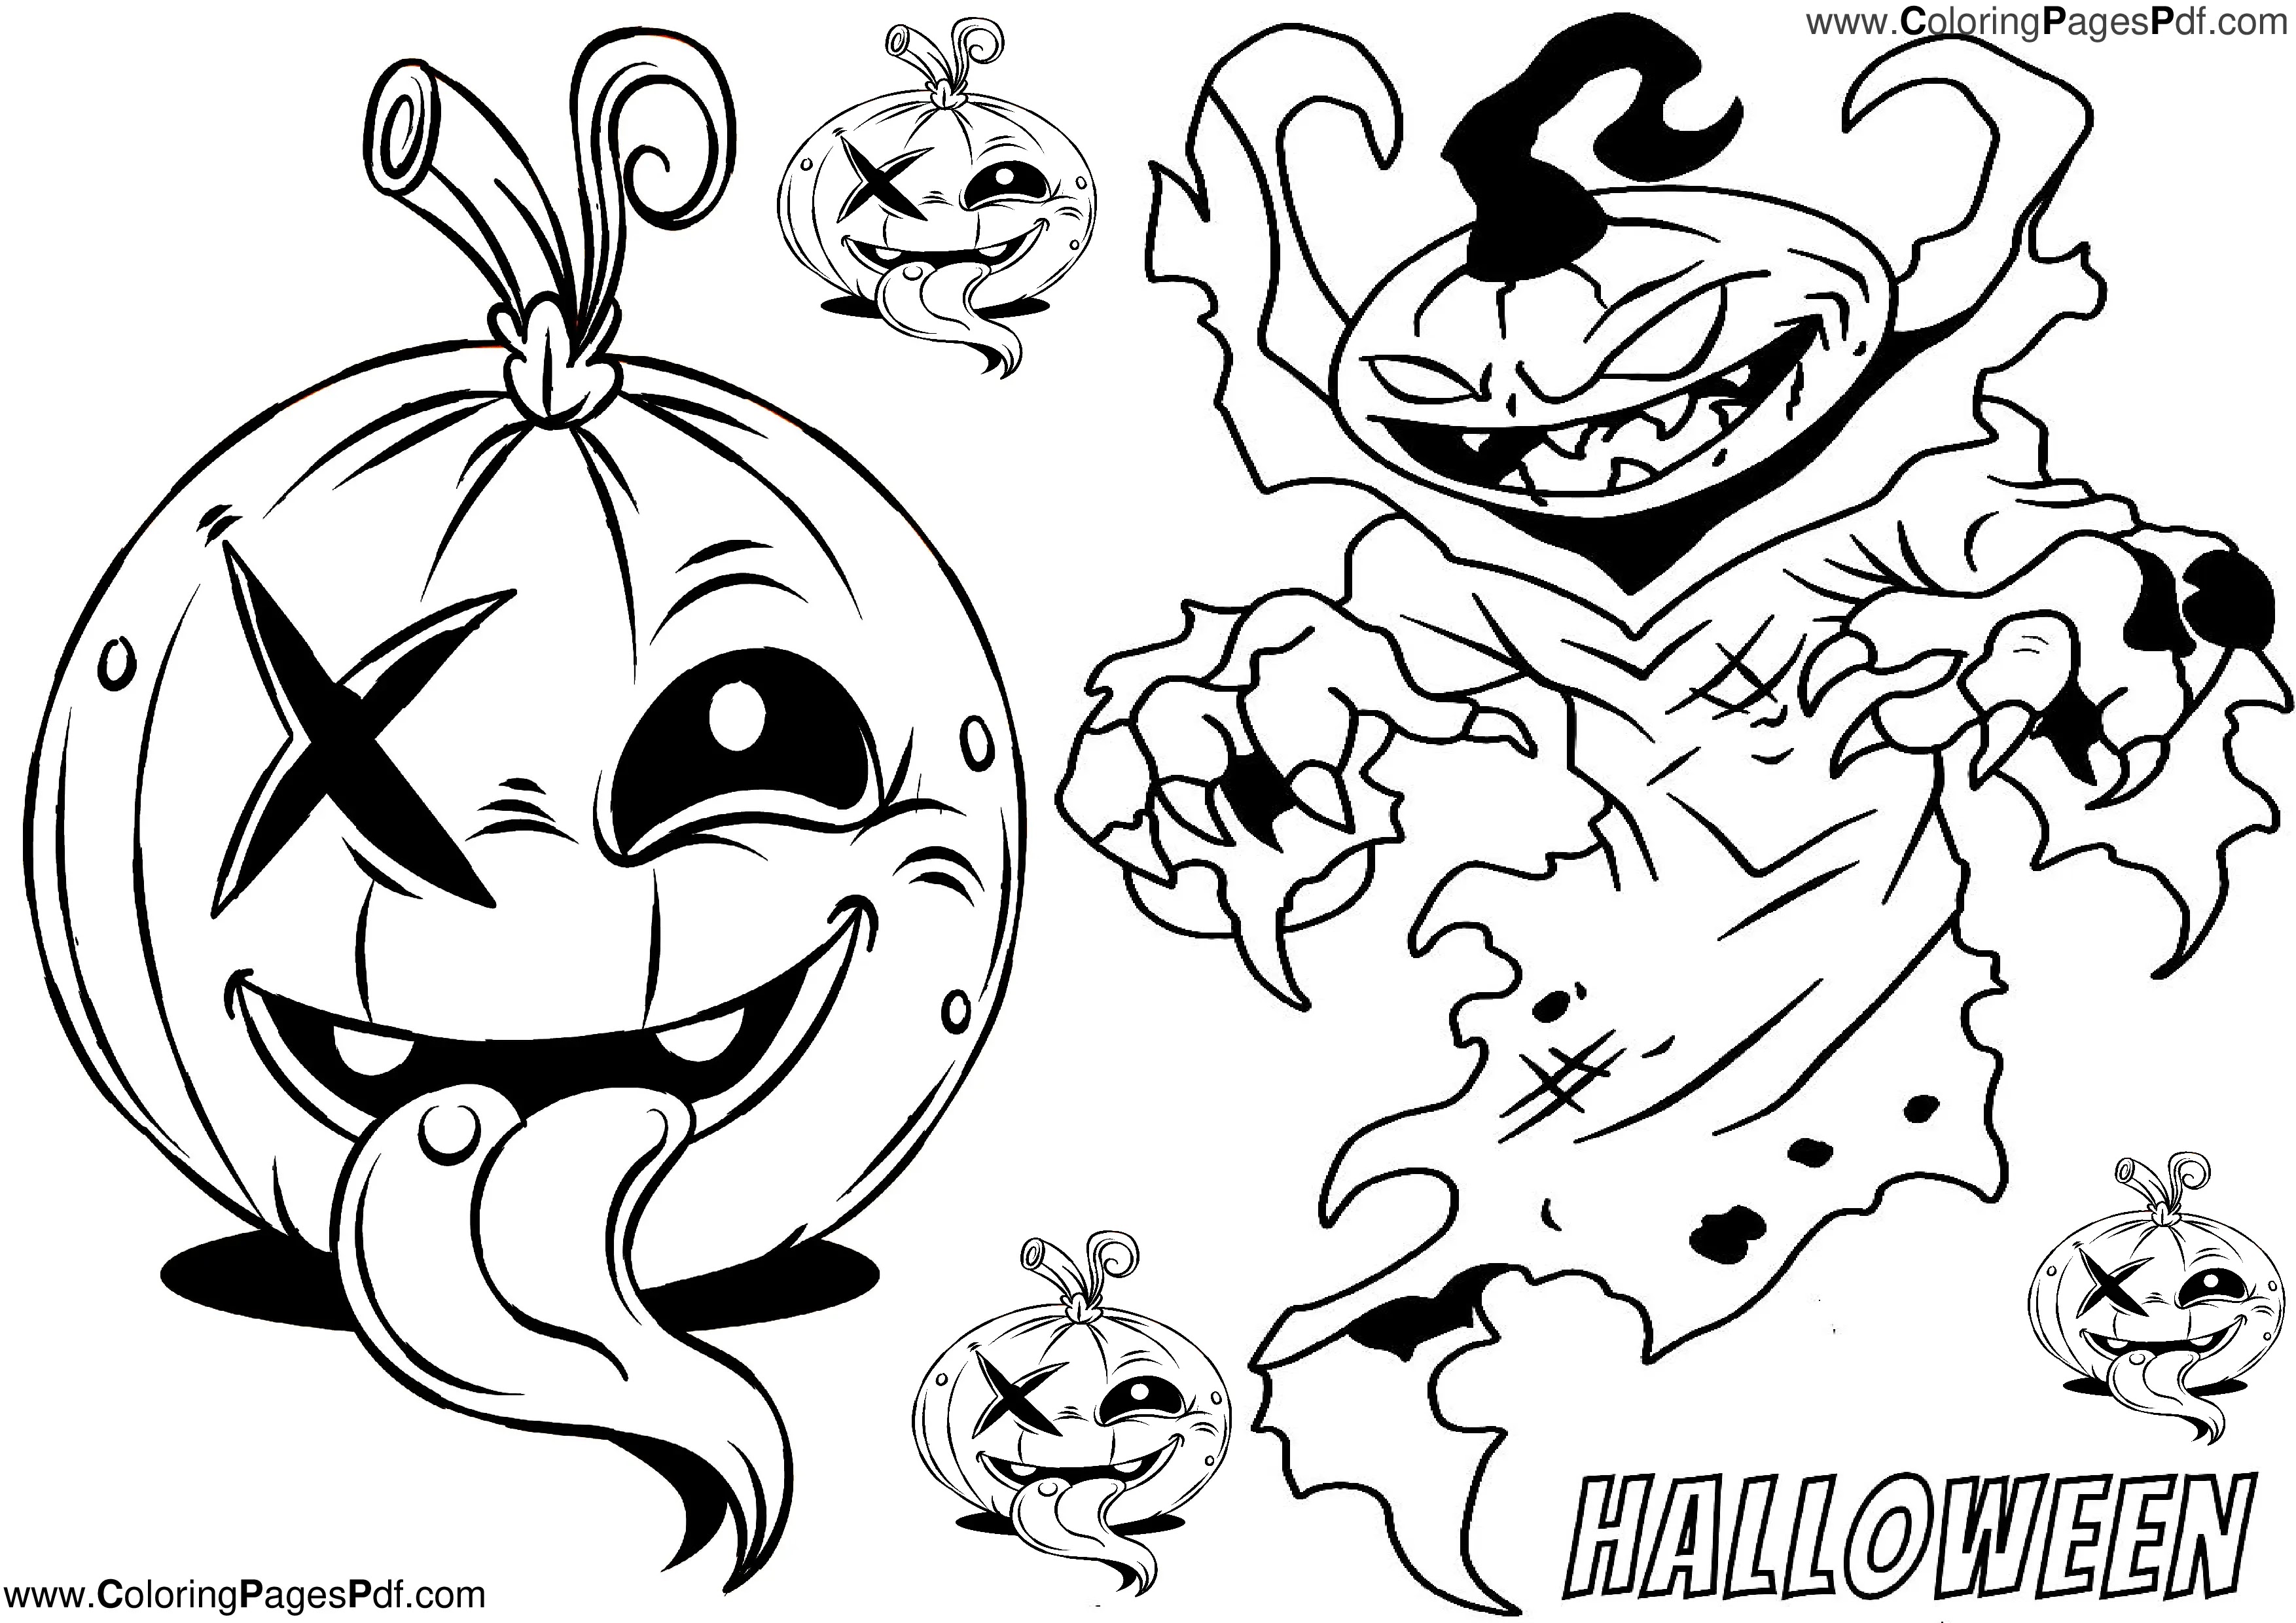 Halloween monster coloring pages